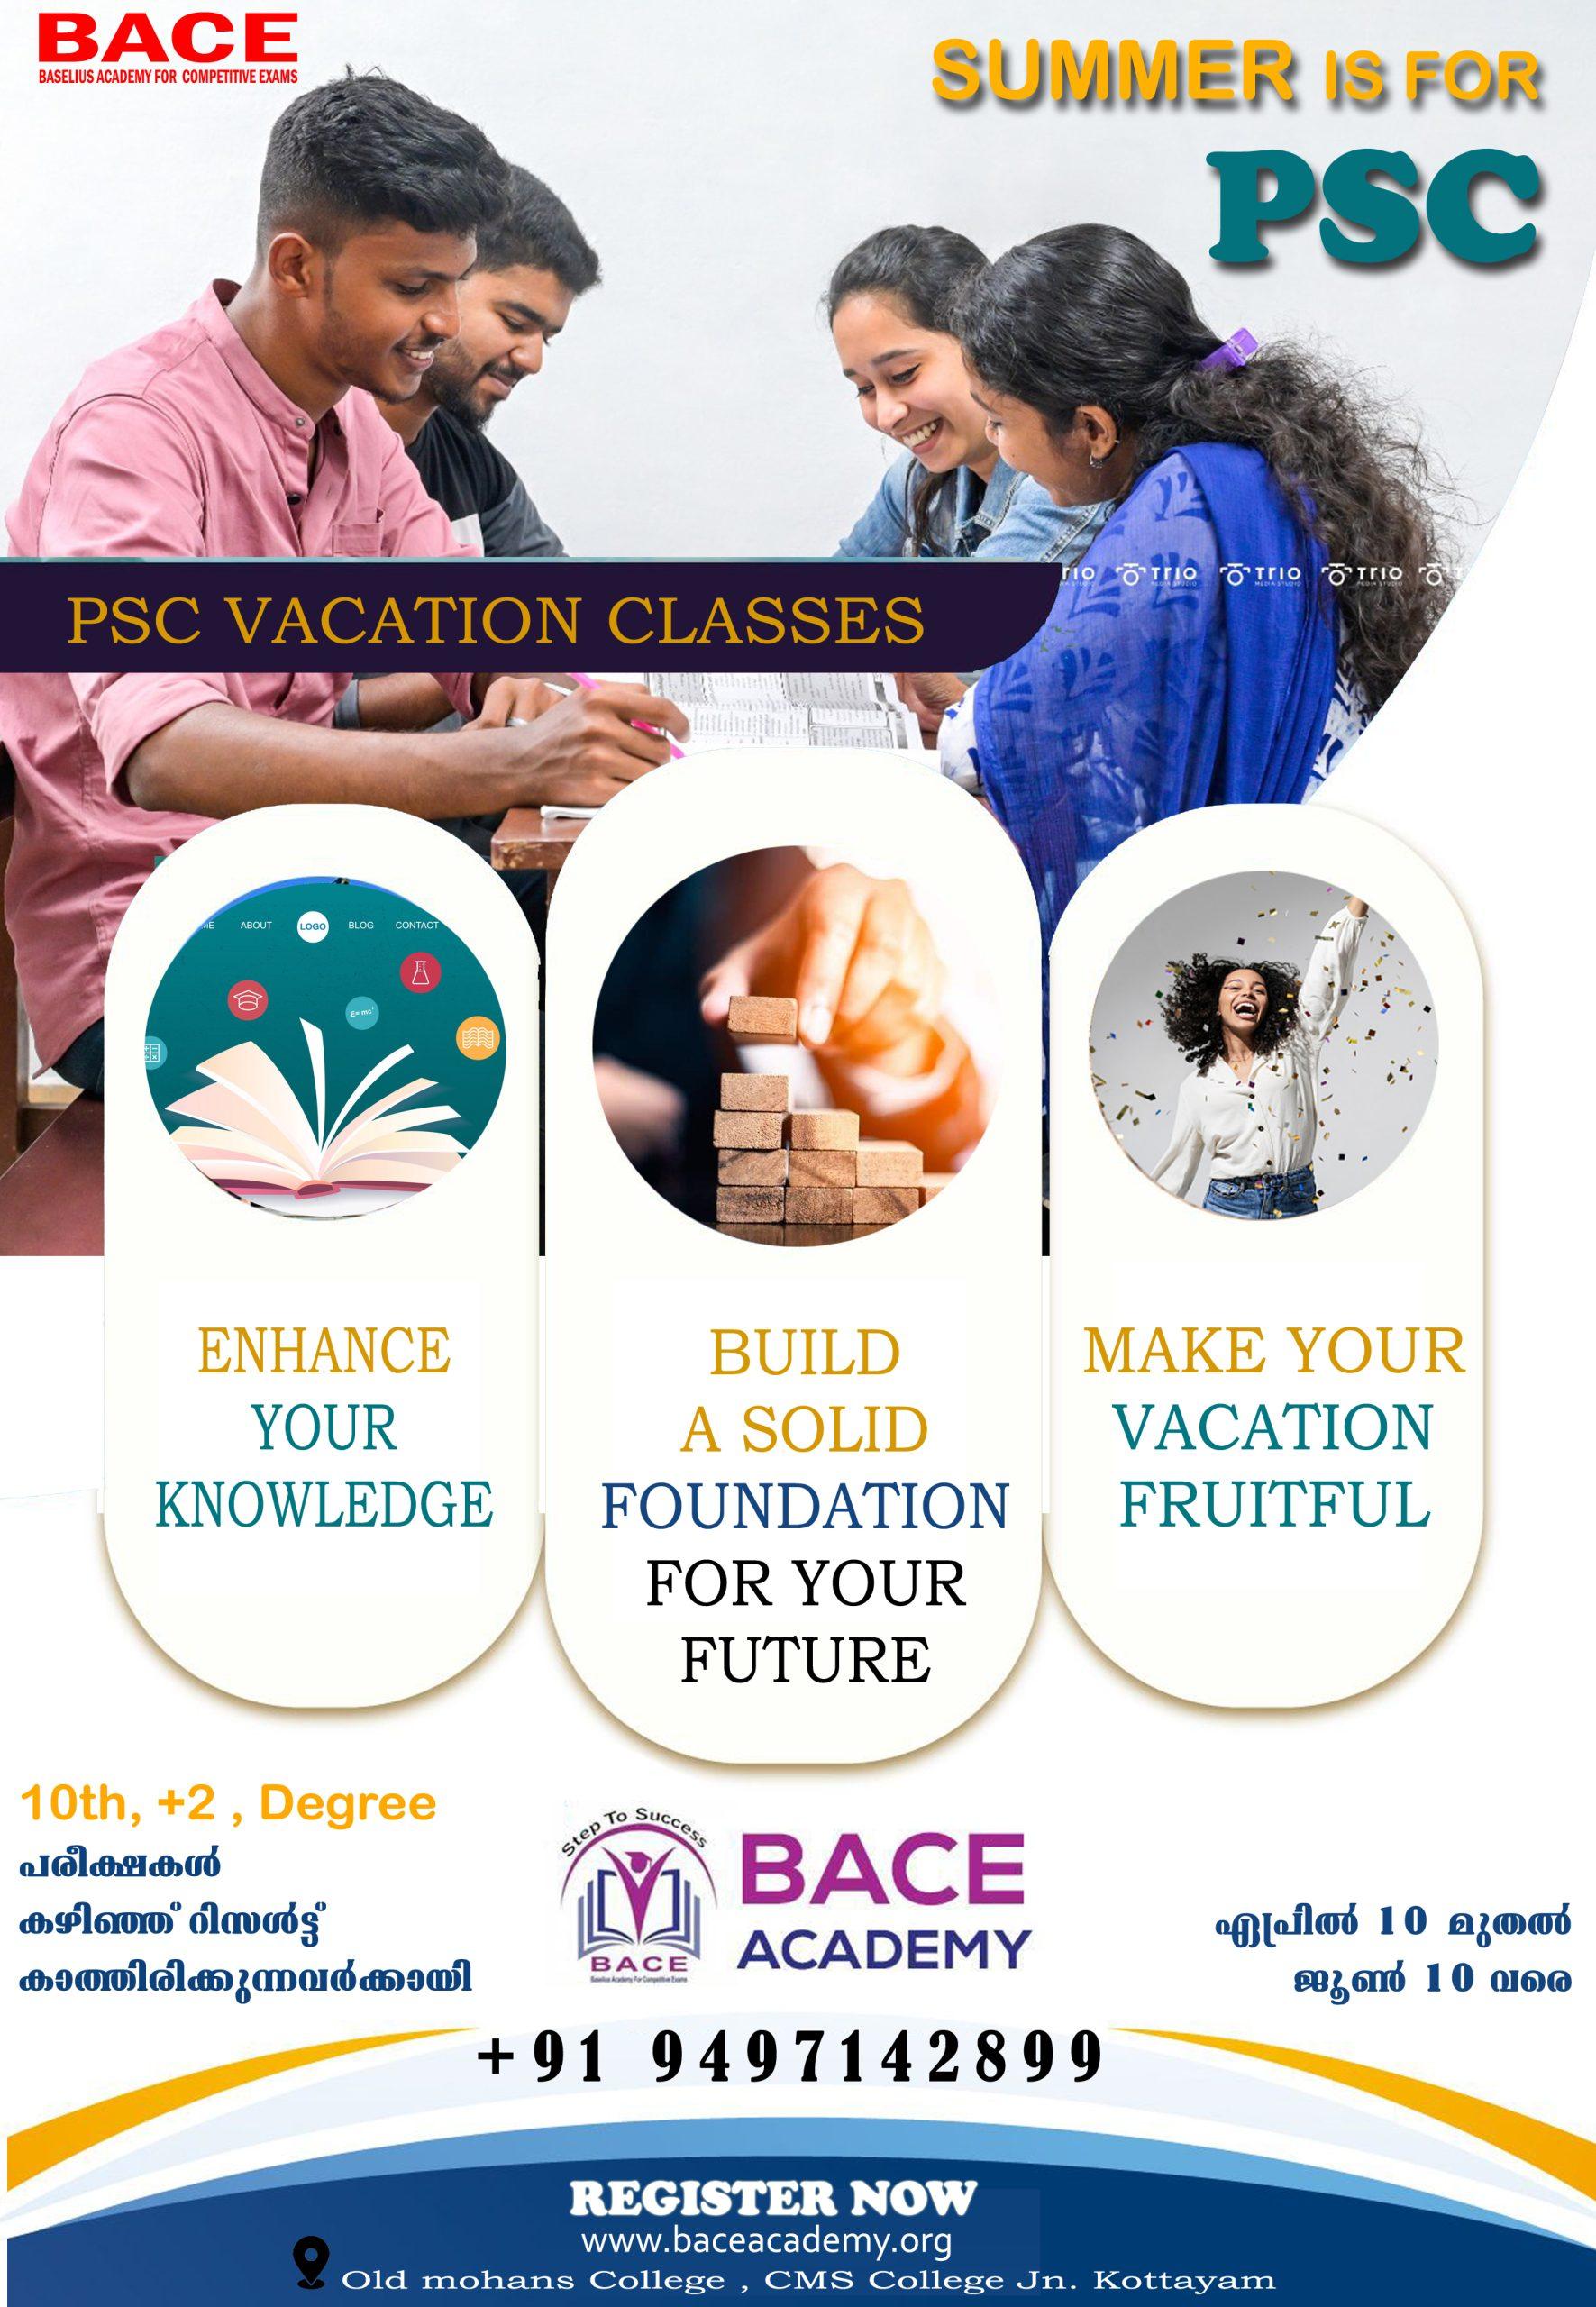 PSC vacation classes Bace Academy